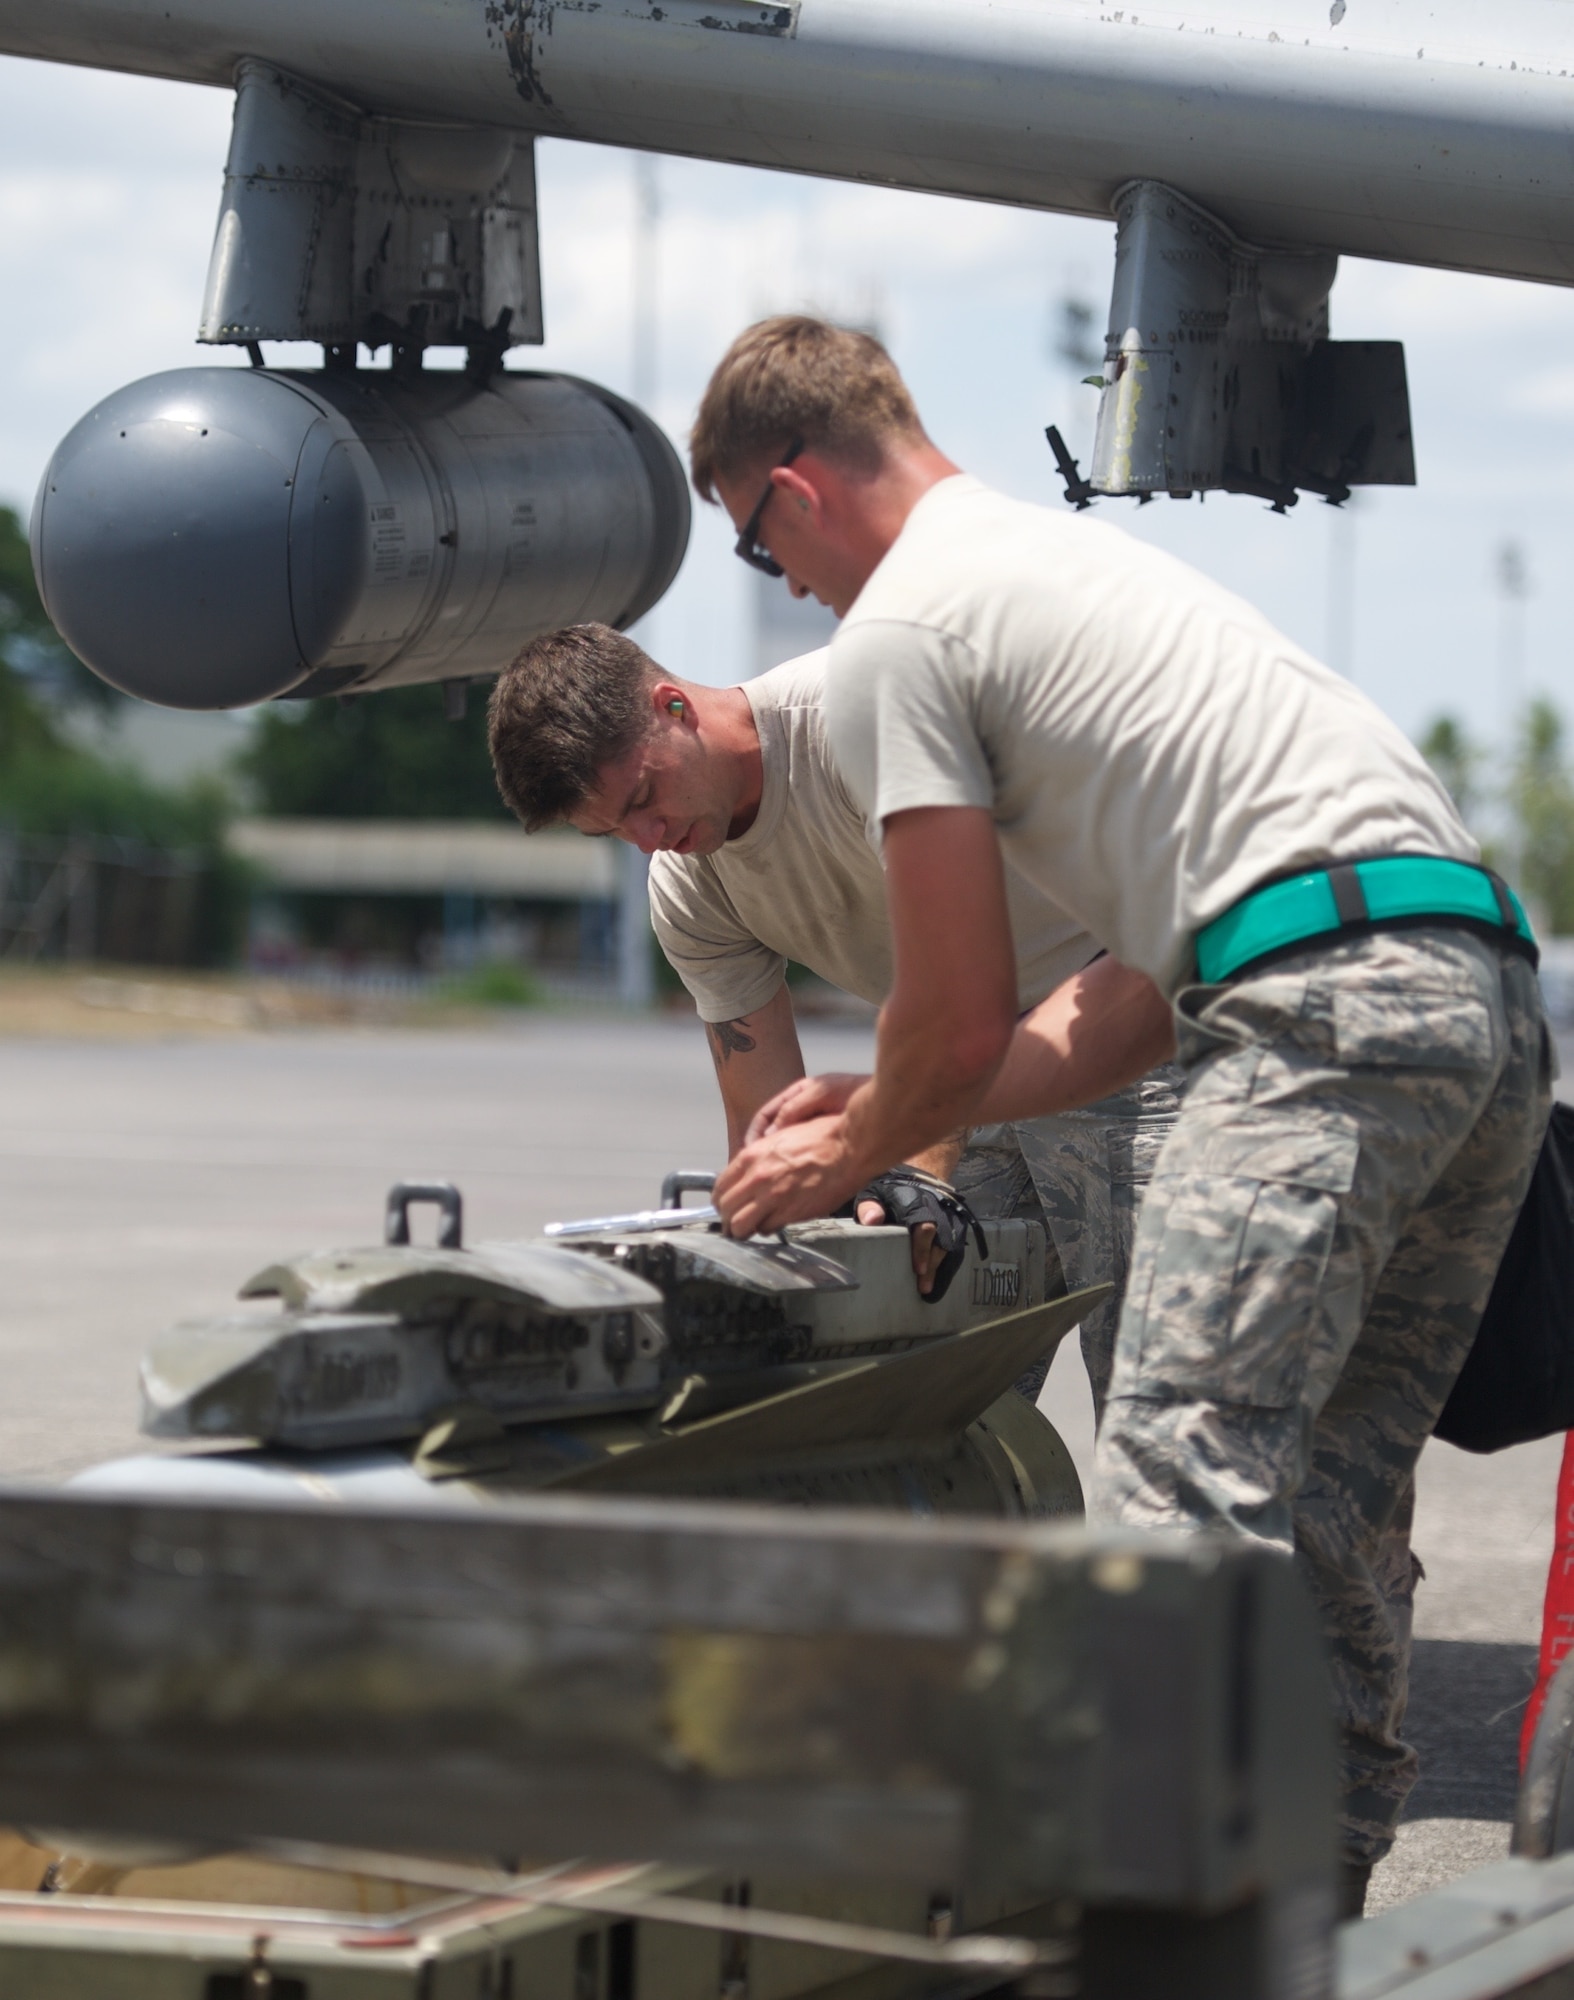 U.S. Air Force Staff Sgt. Kyle Whetham, weapons load crew chief, and Senior Airman Jonathan Simmons, weapons load crew member, inspect a training round from an A-10C Thunderbolt II after the aircraft completed a maritime domain awareness mission in the vicinity of Scarborough Shoal west of the Philippines April 21, 2016. These missions are intended to provide more transparent air and maritime situational awareness to ensure safety for military and civilian activities in international waters and airspace, and as such, the aircraft do not carry live rounds. Whetham and Simmons are deployed to Clark Air Base, Philippines from Osan Air Base, Republic of Korea. (U.S. Air Force photo by Capt. Susan Harrington)